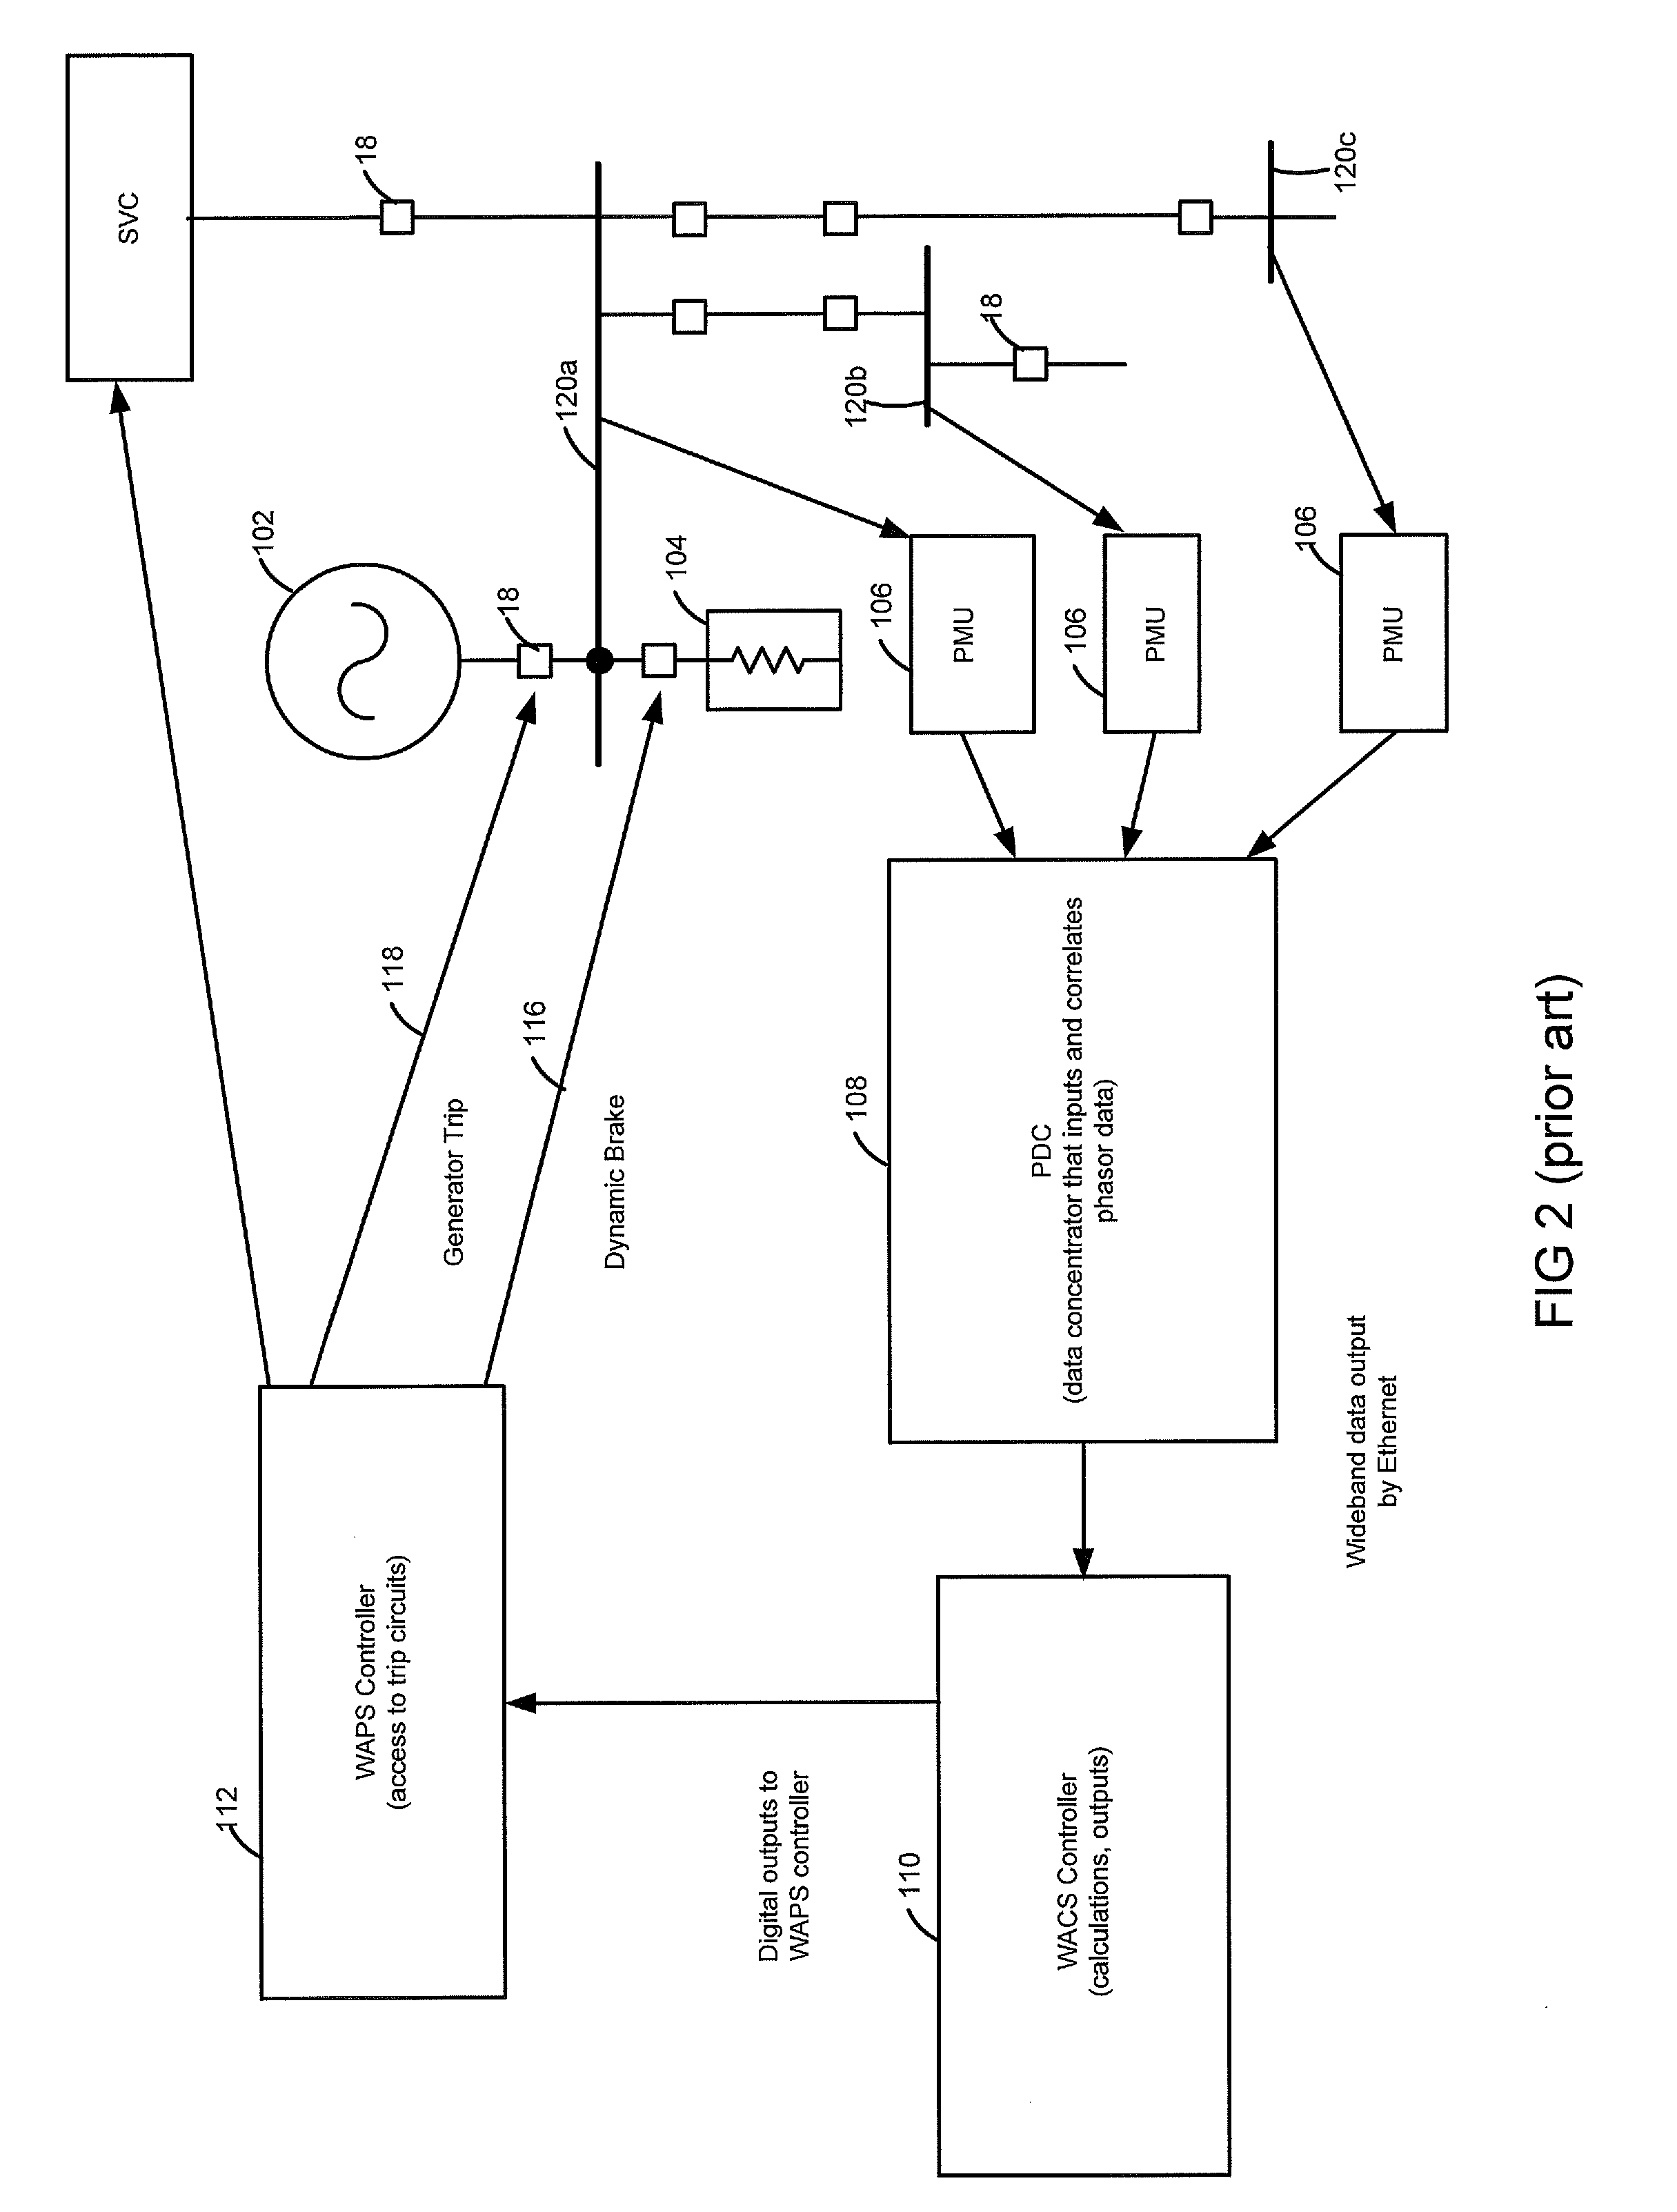 Apparatus, method, and system for wide-area protection and control using power system data having a time component associated therewith